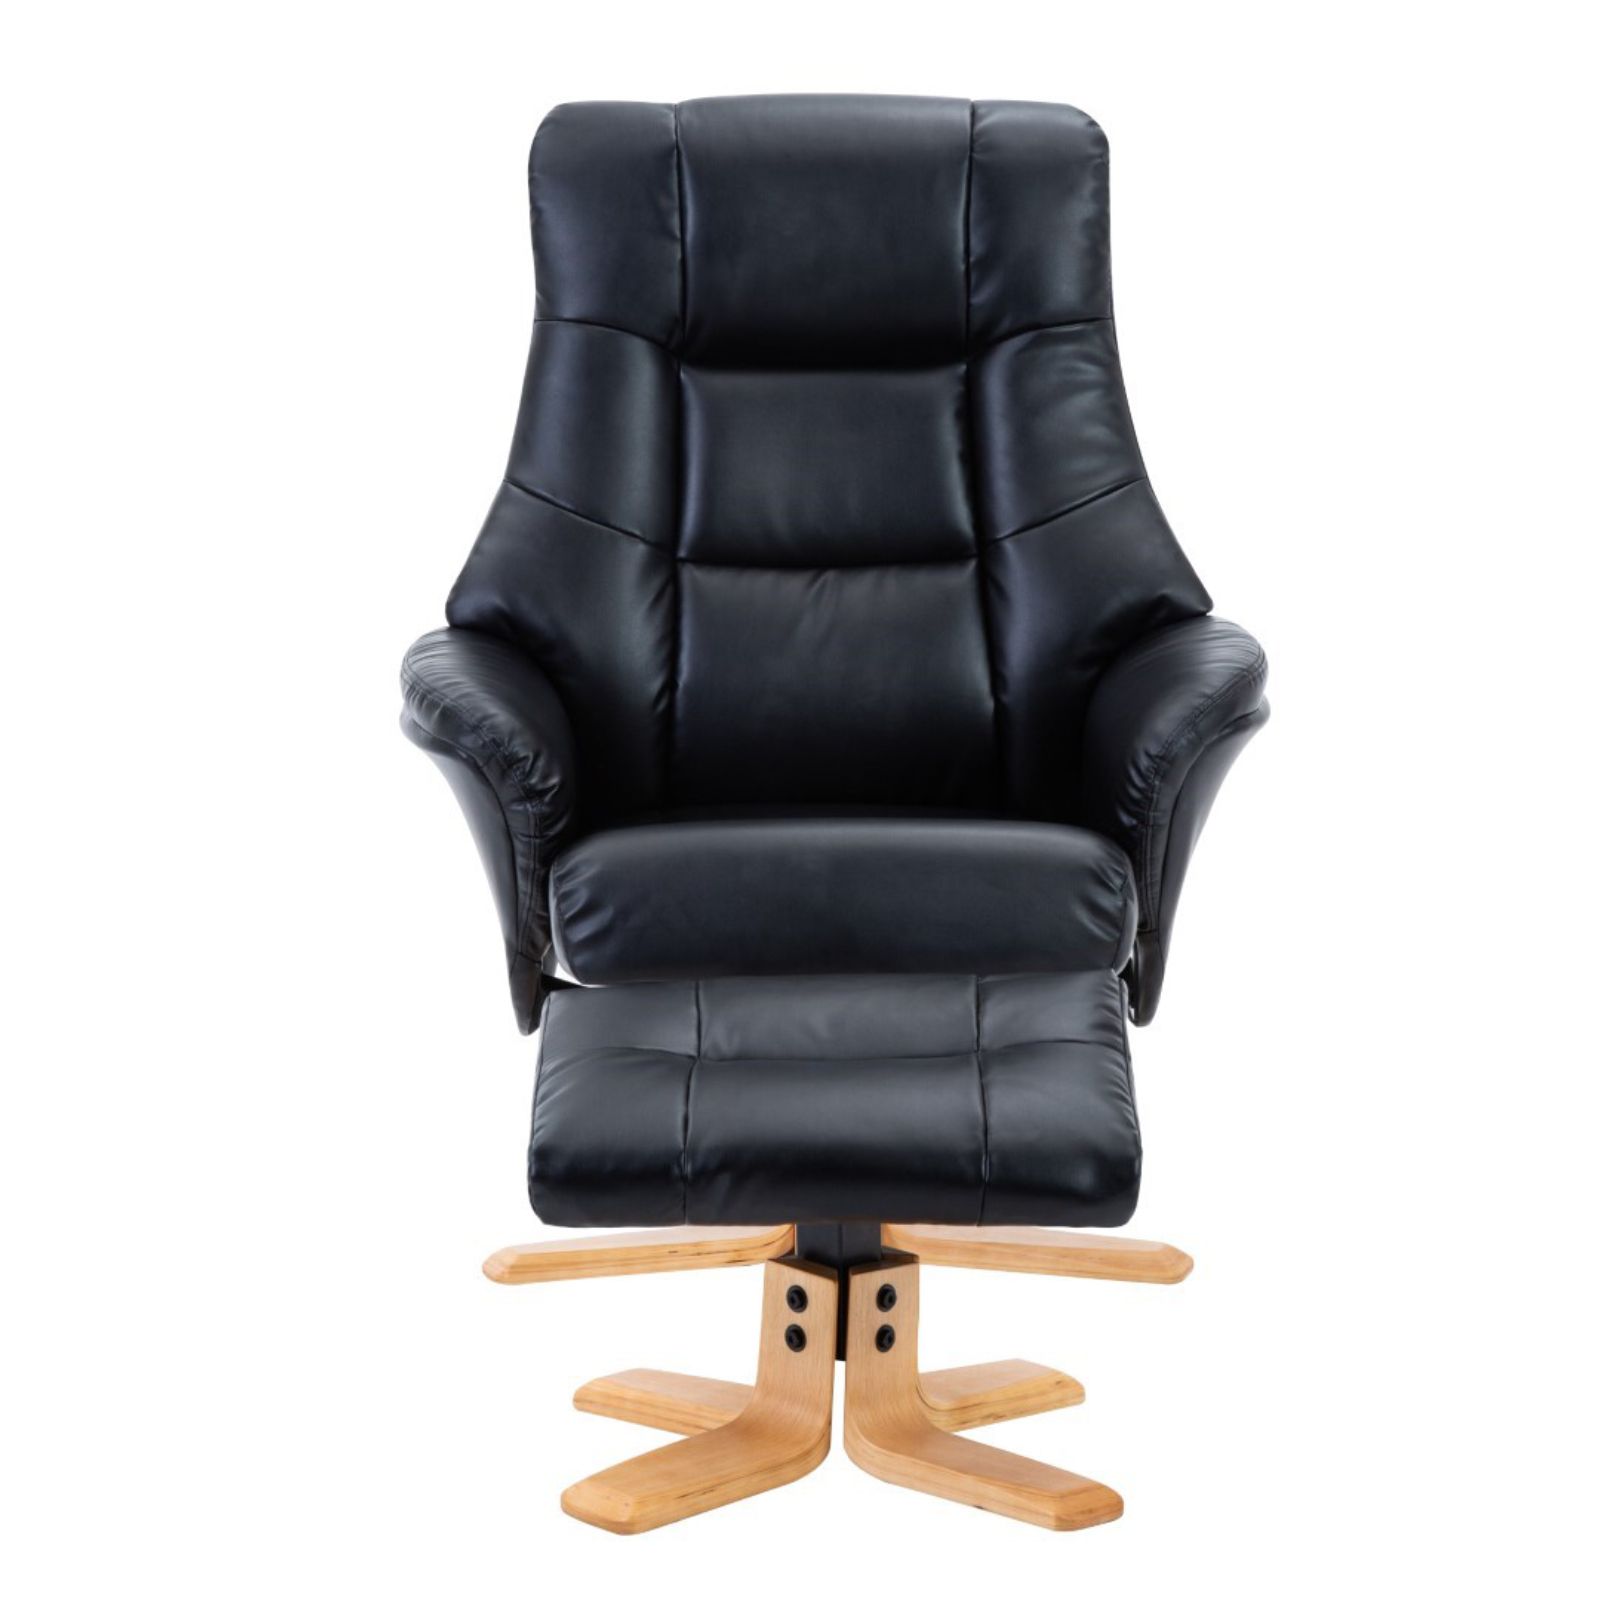 The Bari – Faux Leather Swivel Recliner Chair & Footstool In Black Within Black Faux Leather Swivel Recliners (View 5 of 20)